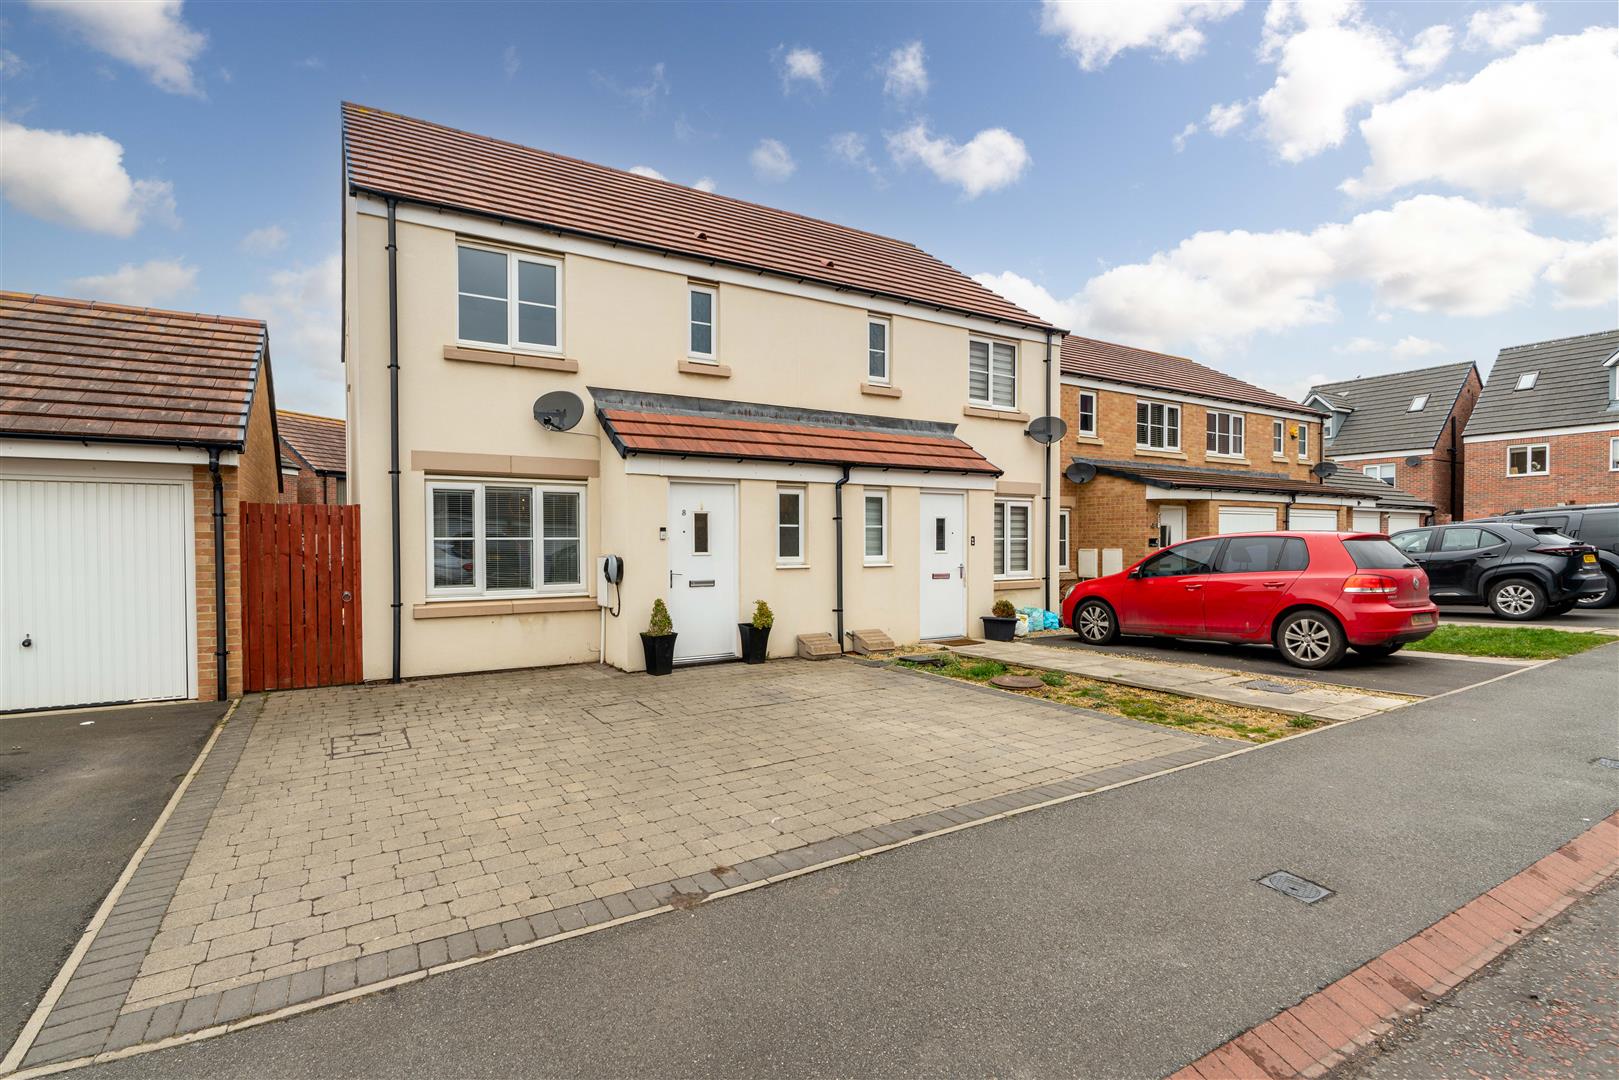 3 bed semi-detached house for sale in Halton Grove, Blyth  - Property Image 1